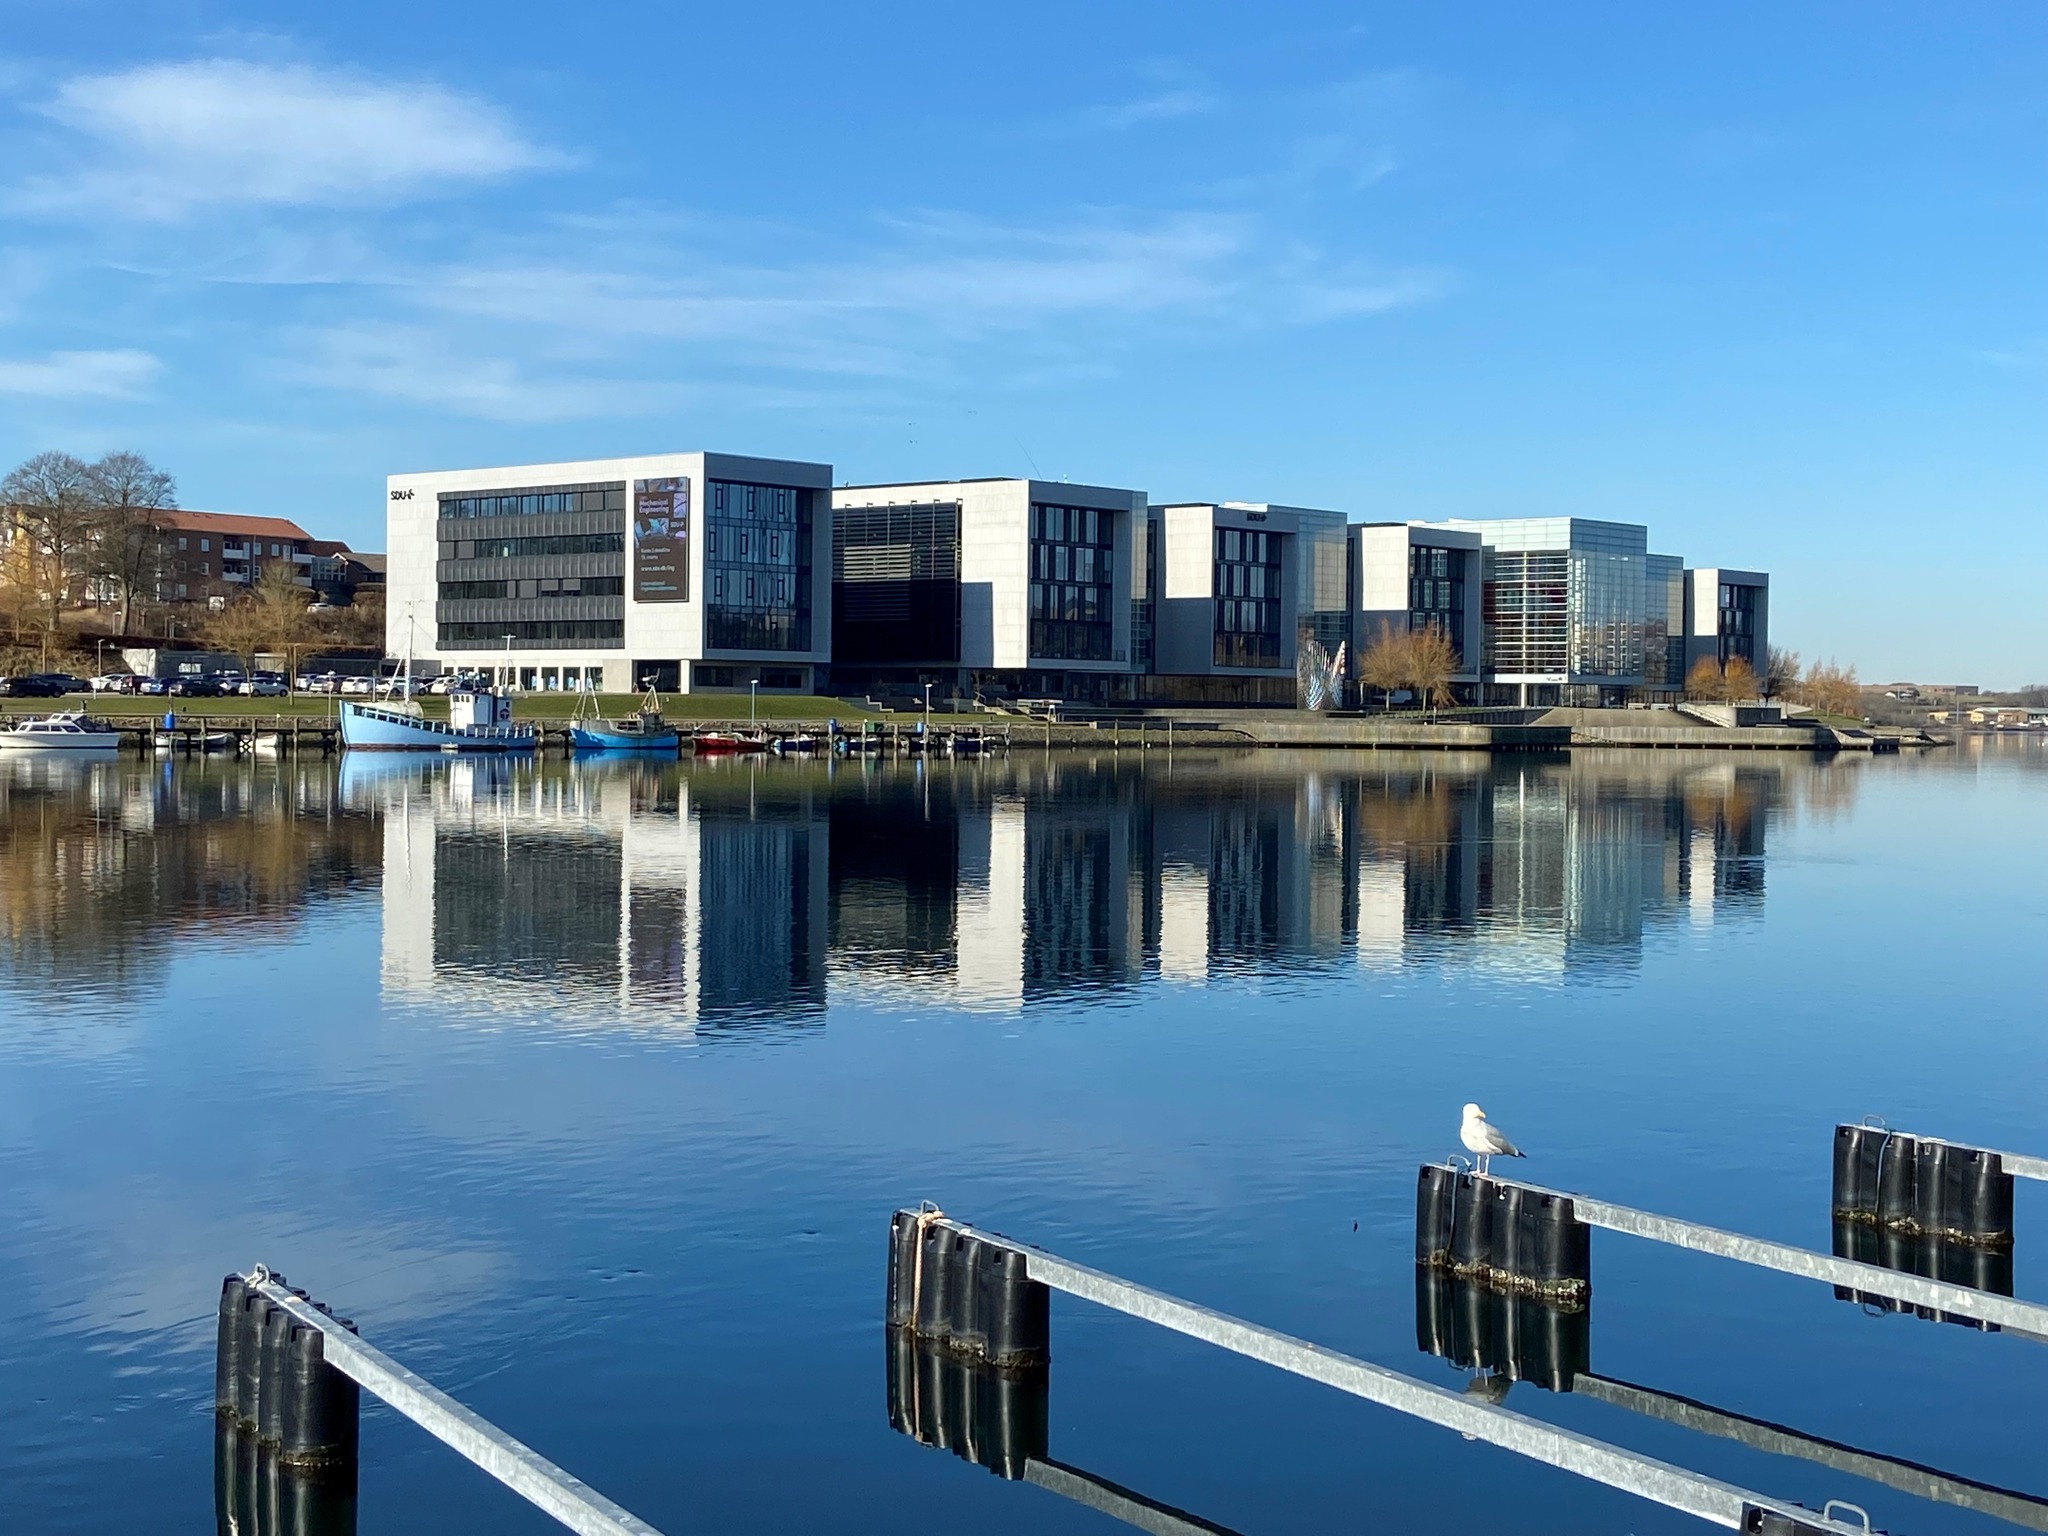 The new Software Engineering Education at SDU Sønderborg